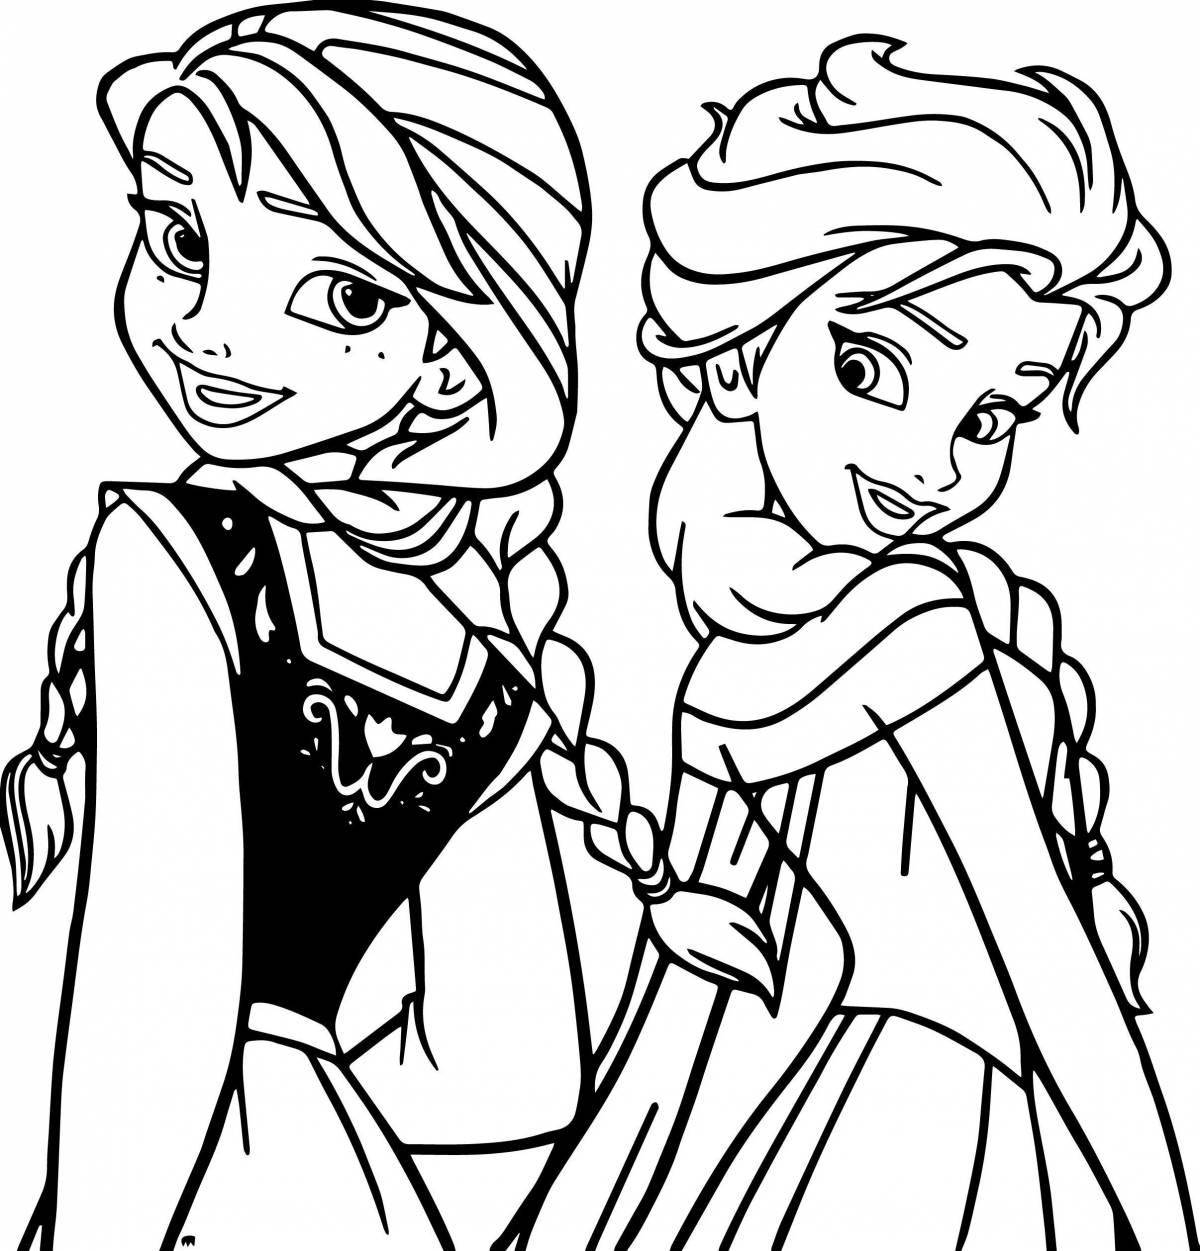 Funny cartoon sisters coloring pages